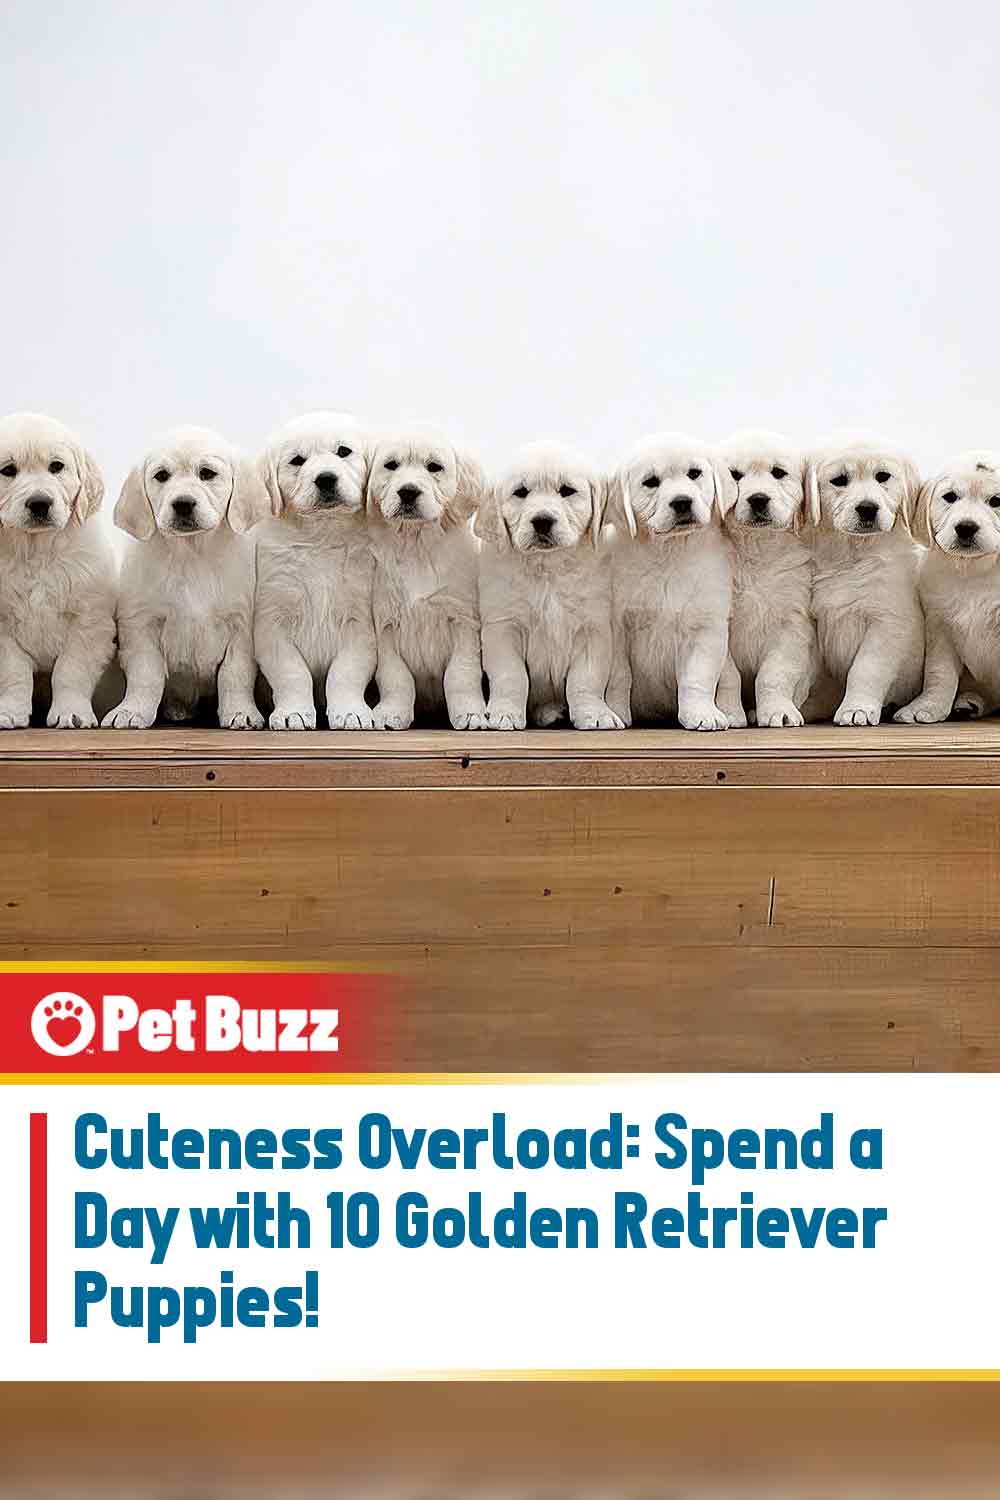 Cuteness Overload: Spend a Day with 10 Golden Retriever Puppies!